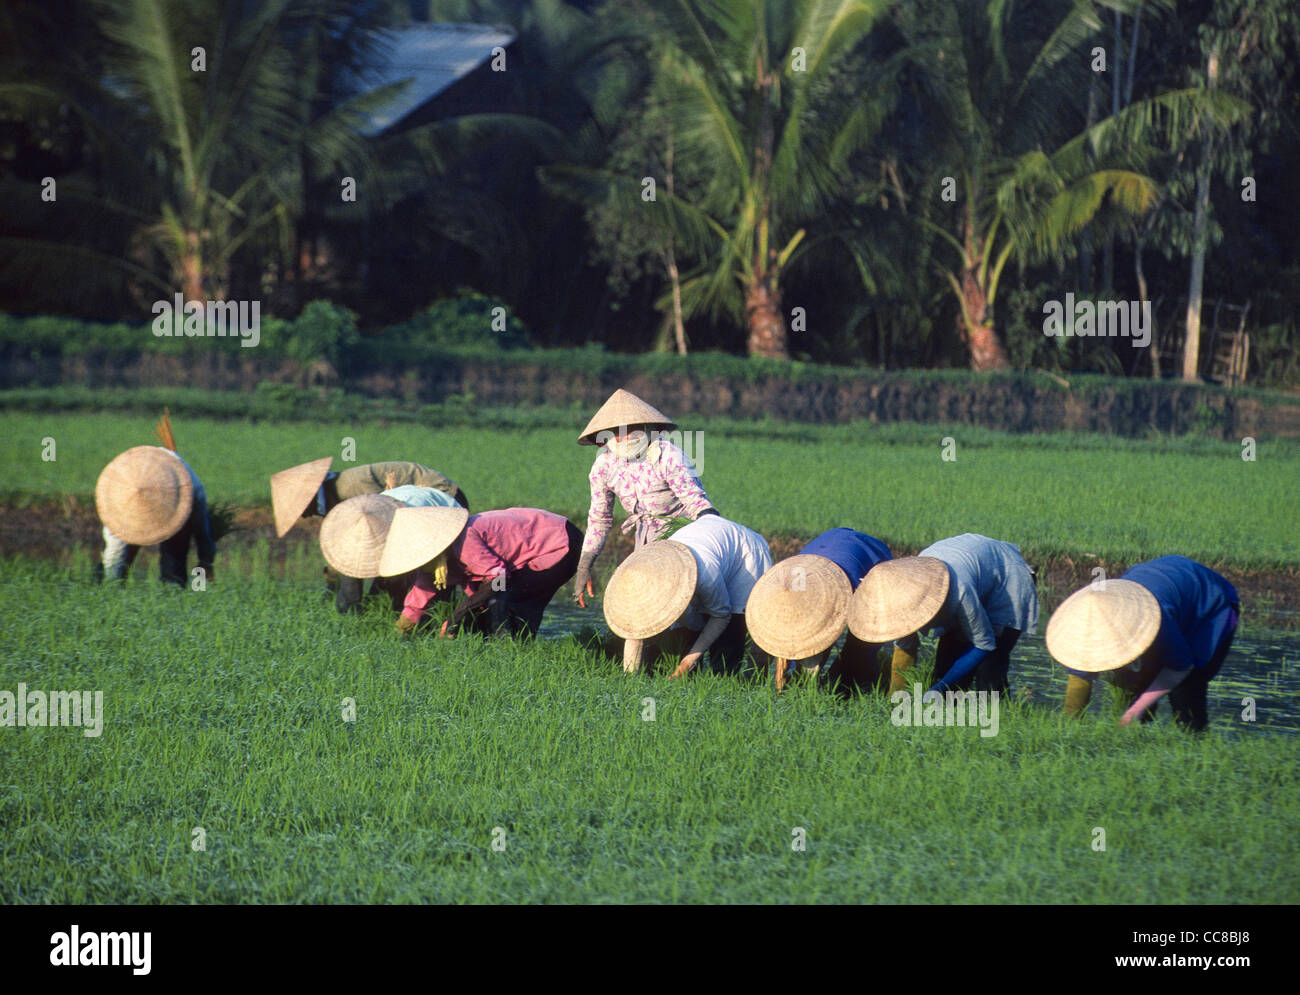 Group of women planting rice in paddy field Mekong Delta Vietnam Stock Photo